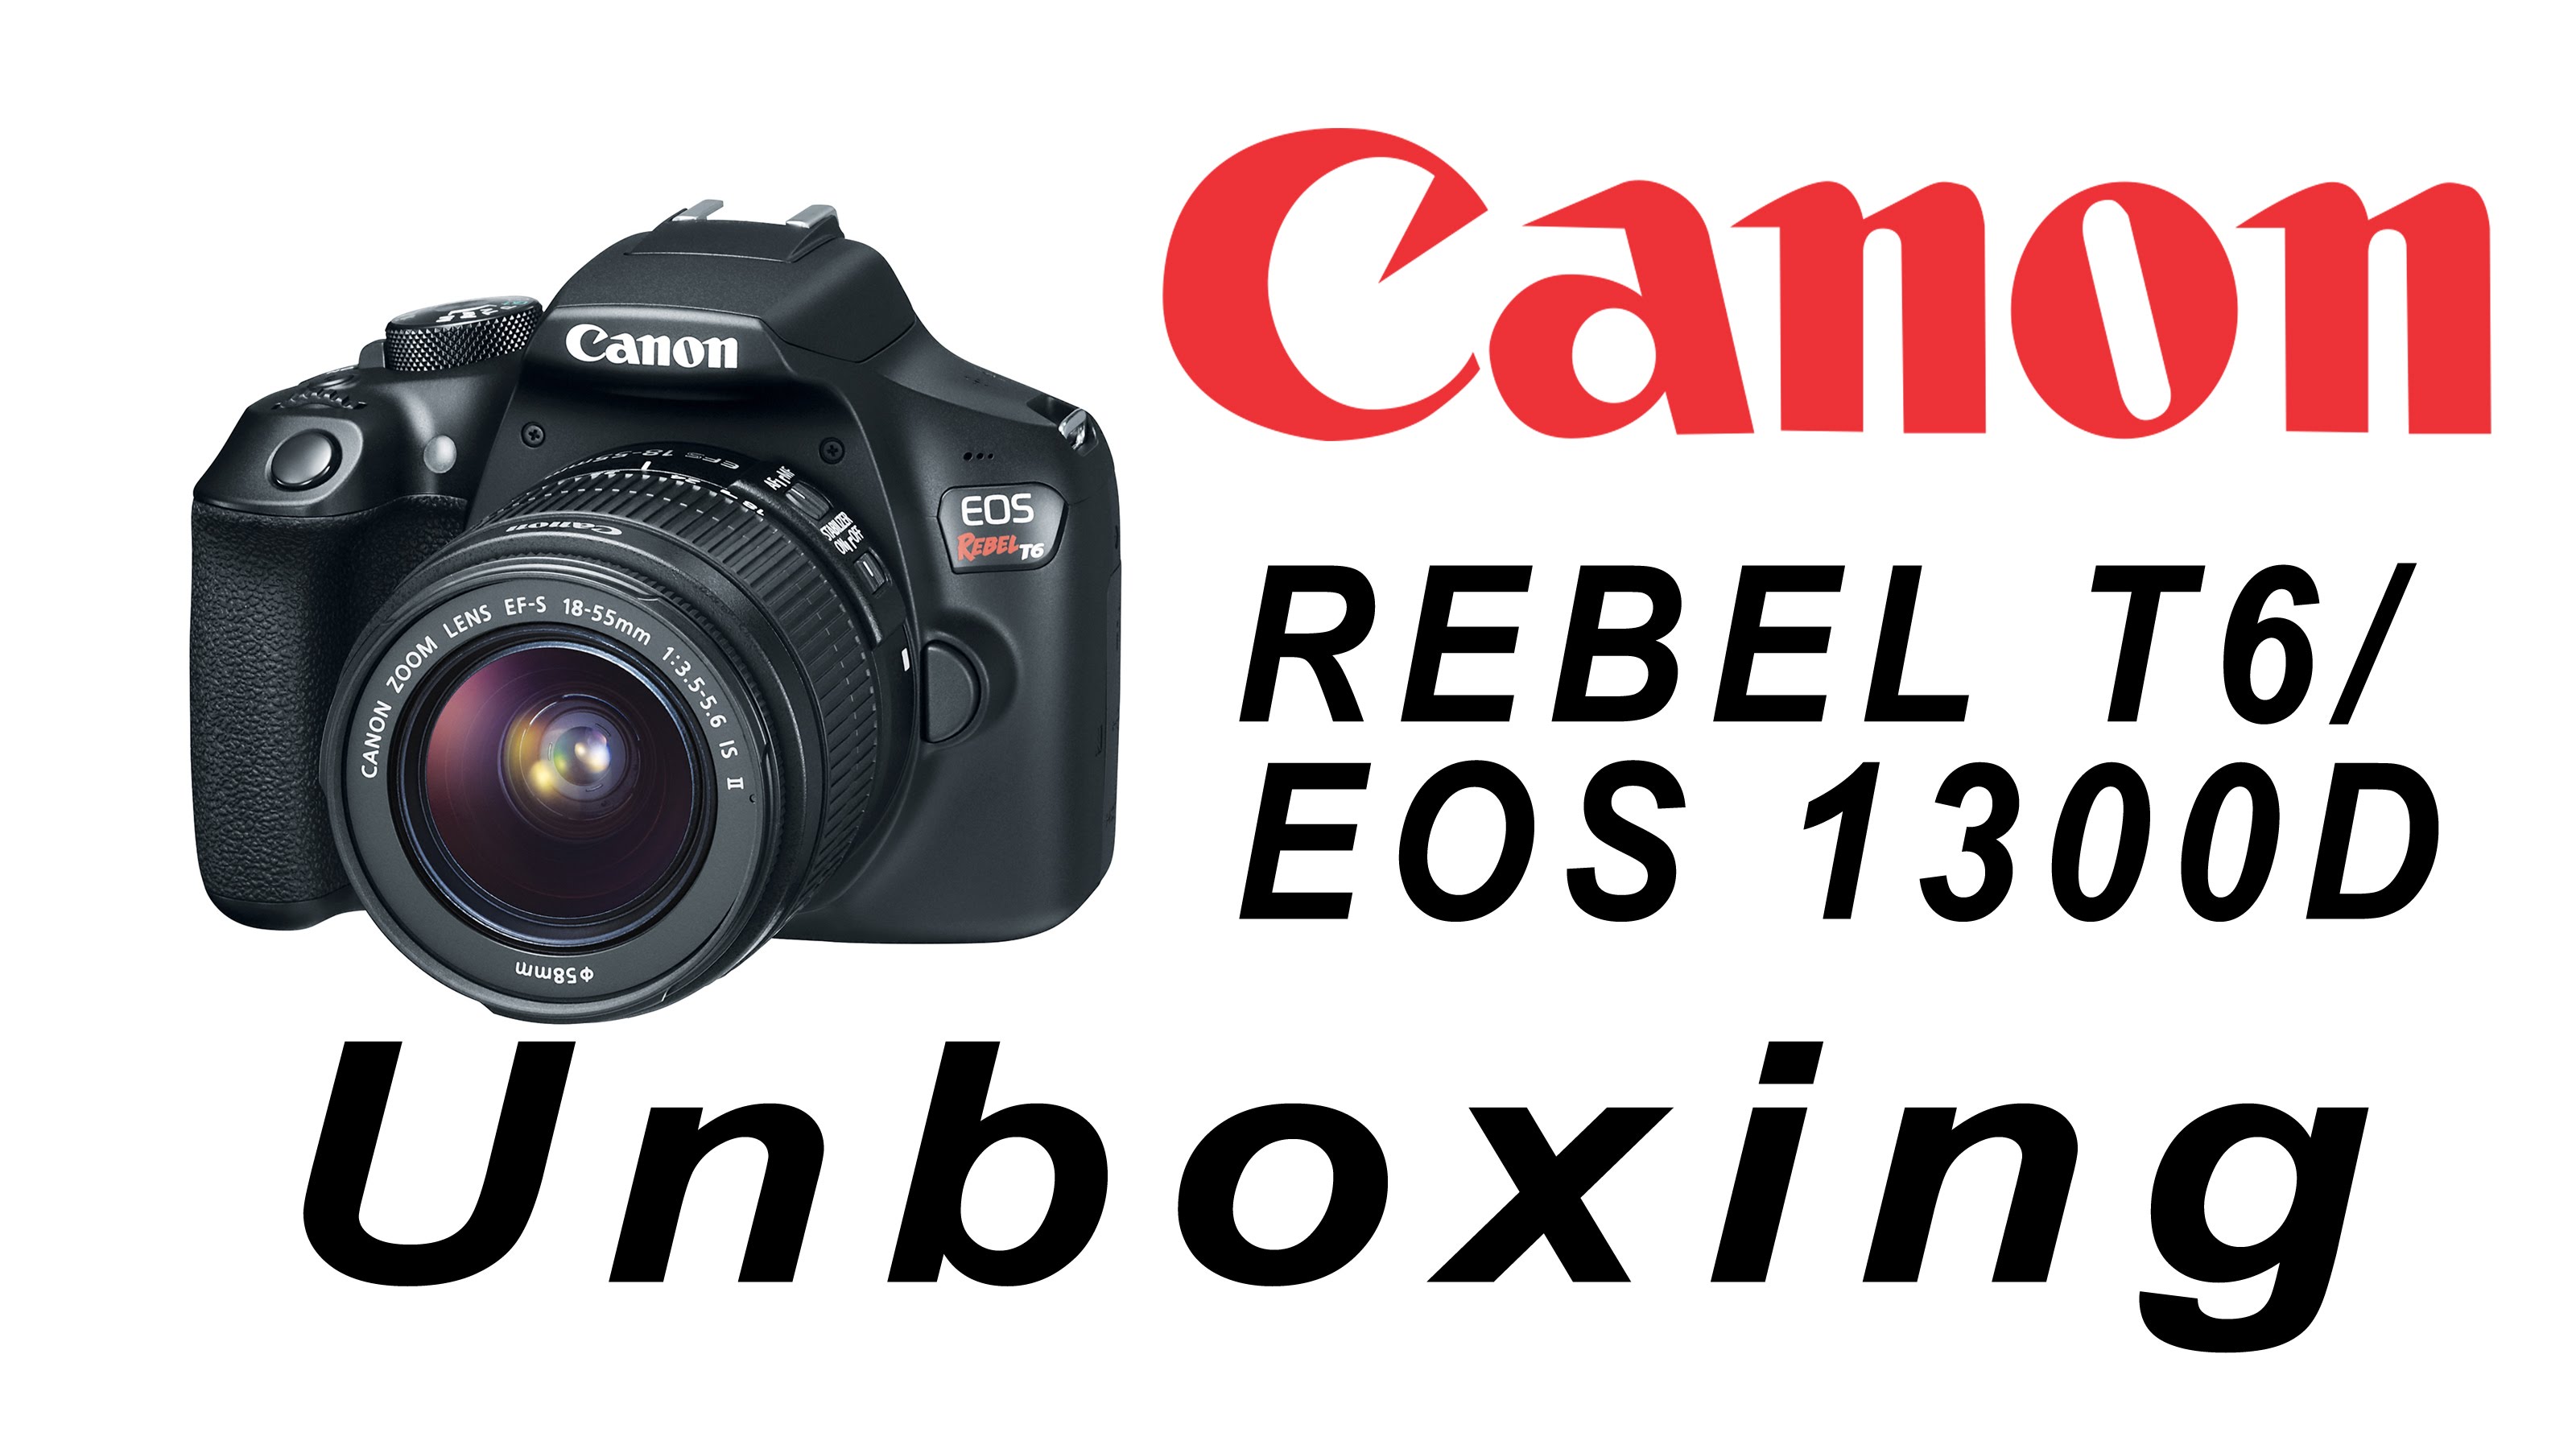 New Canon Rebel T6 / Eos 1300D DSLR camera unboxing video | first look – YouTube